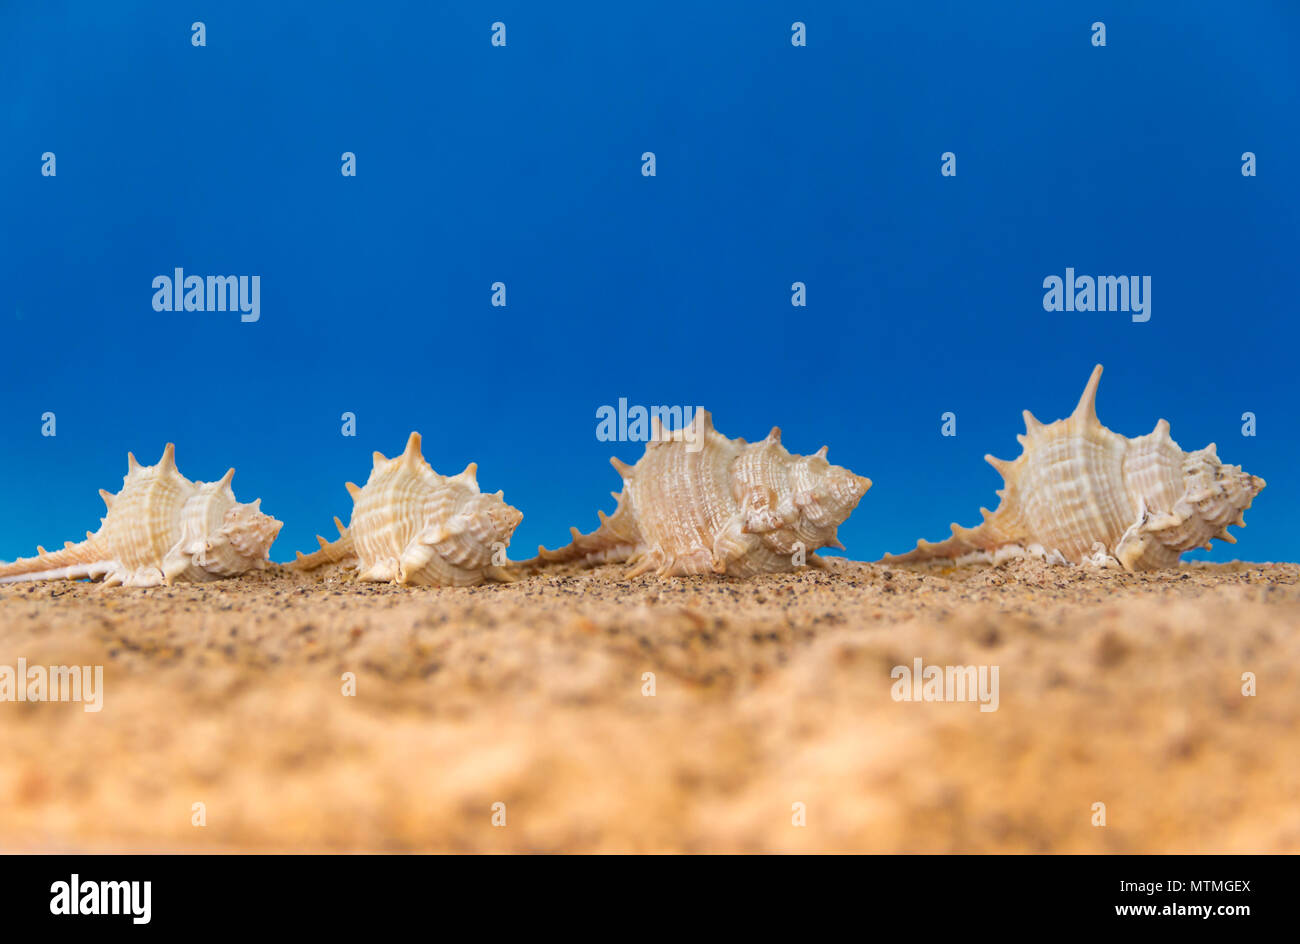 minimalist background representing the summer with snails clams goggles and sand on celestial Stock Photo